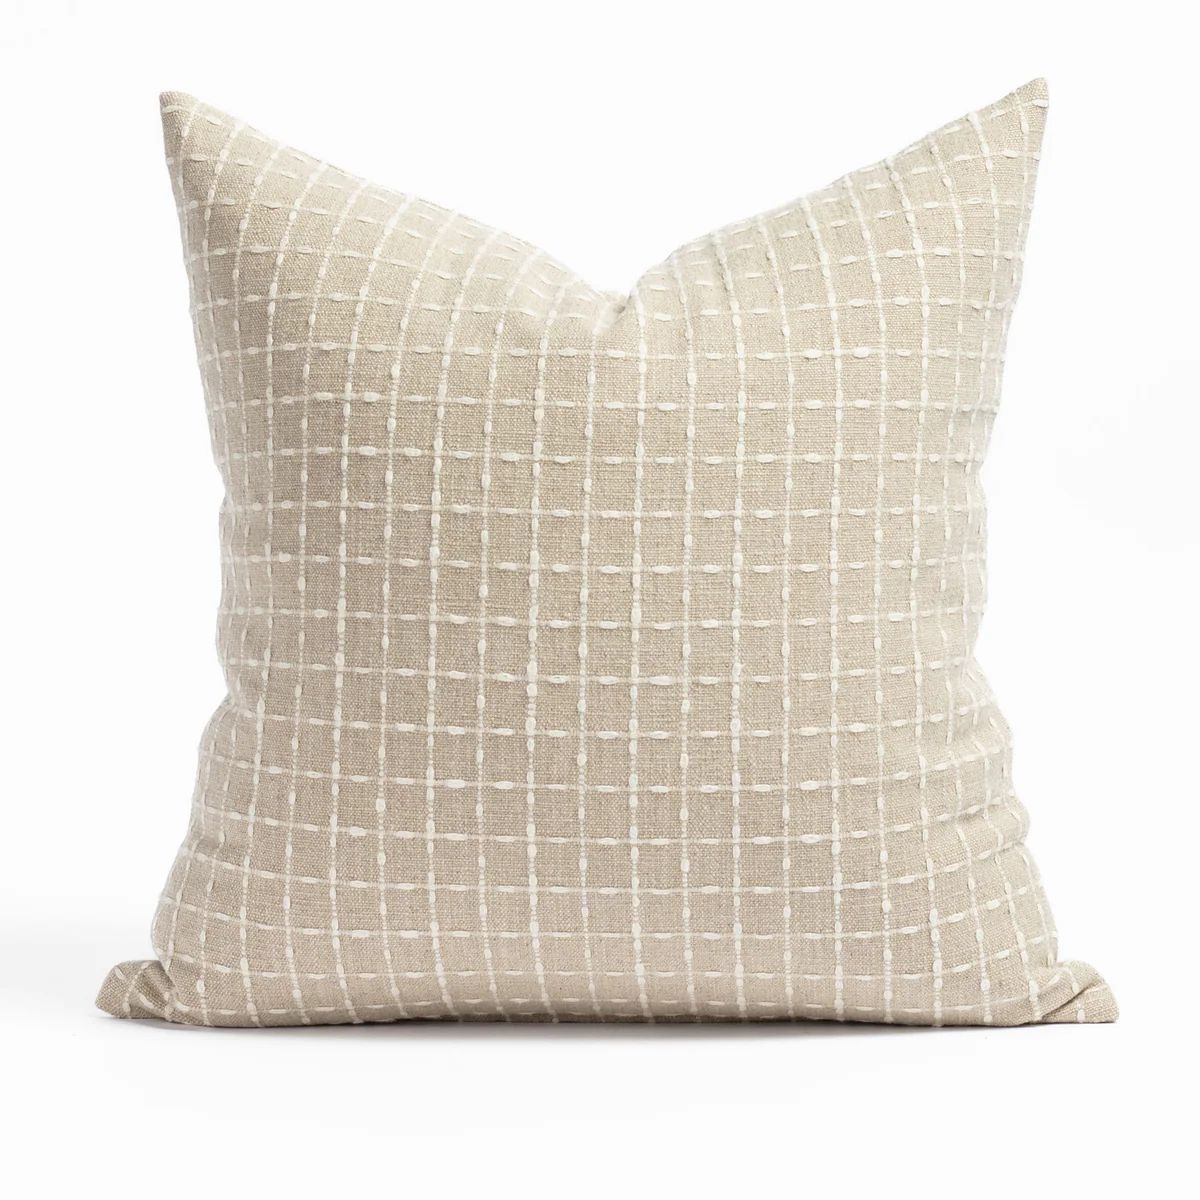 Chase 20x20 Pillow, Natural | Tonic Living